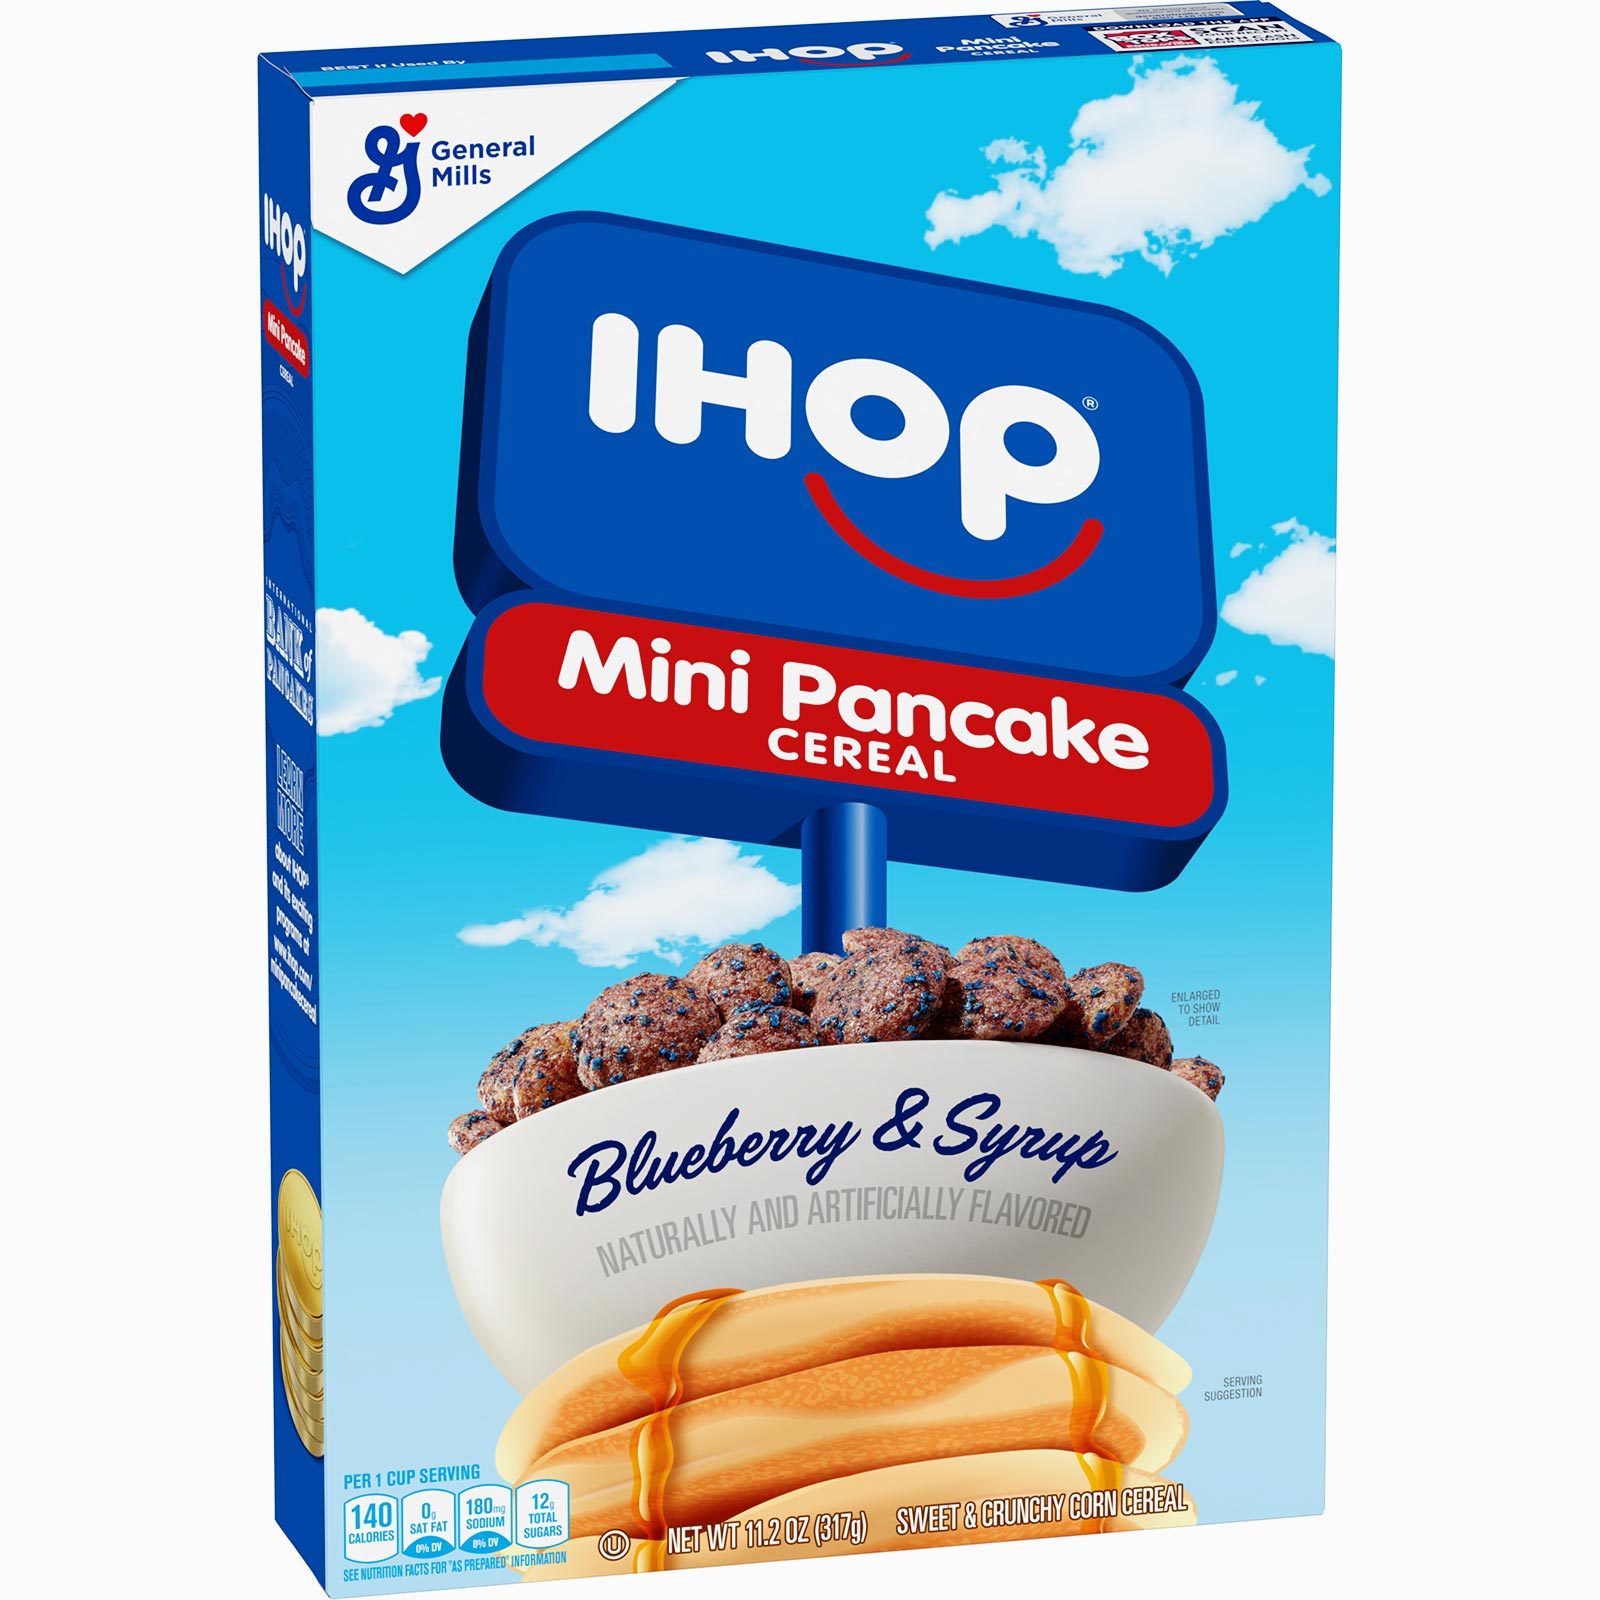 We Can't Wait to Try the New IHOP Mini Pancake Cereal Taste of Home